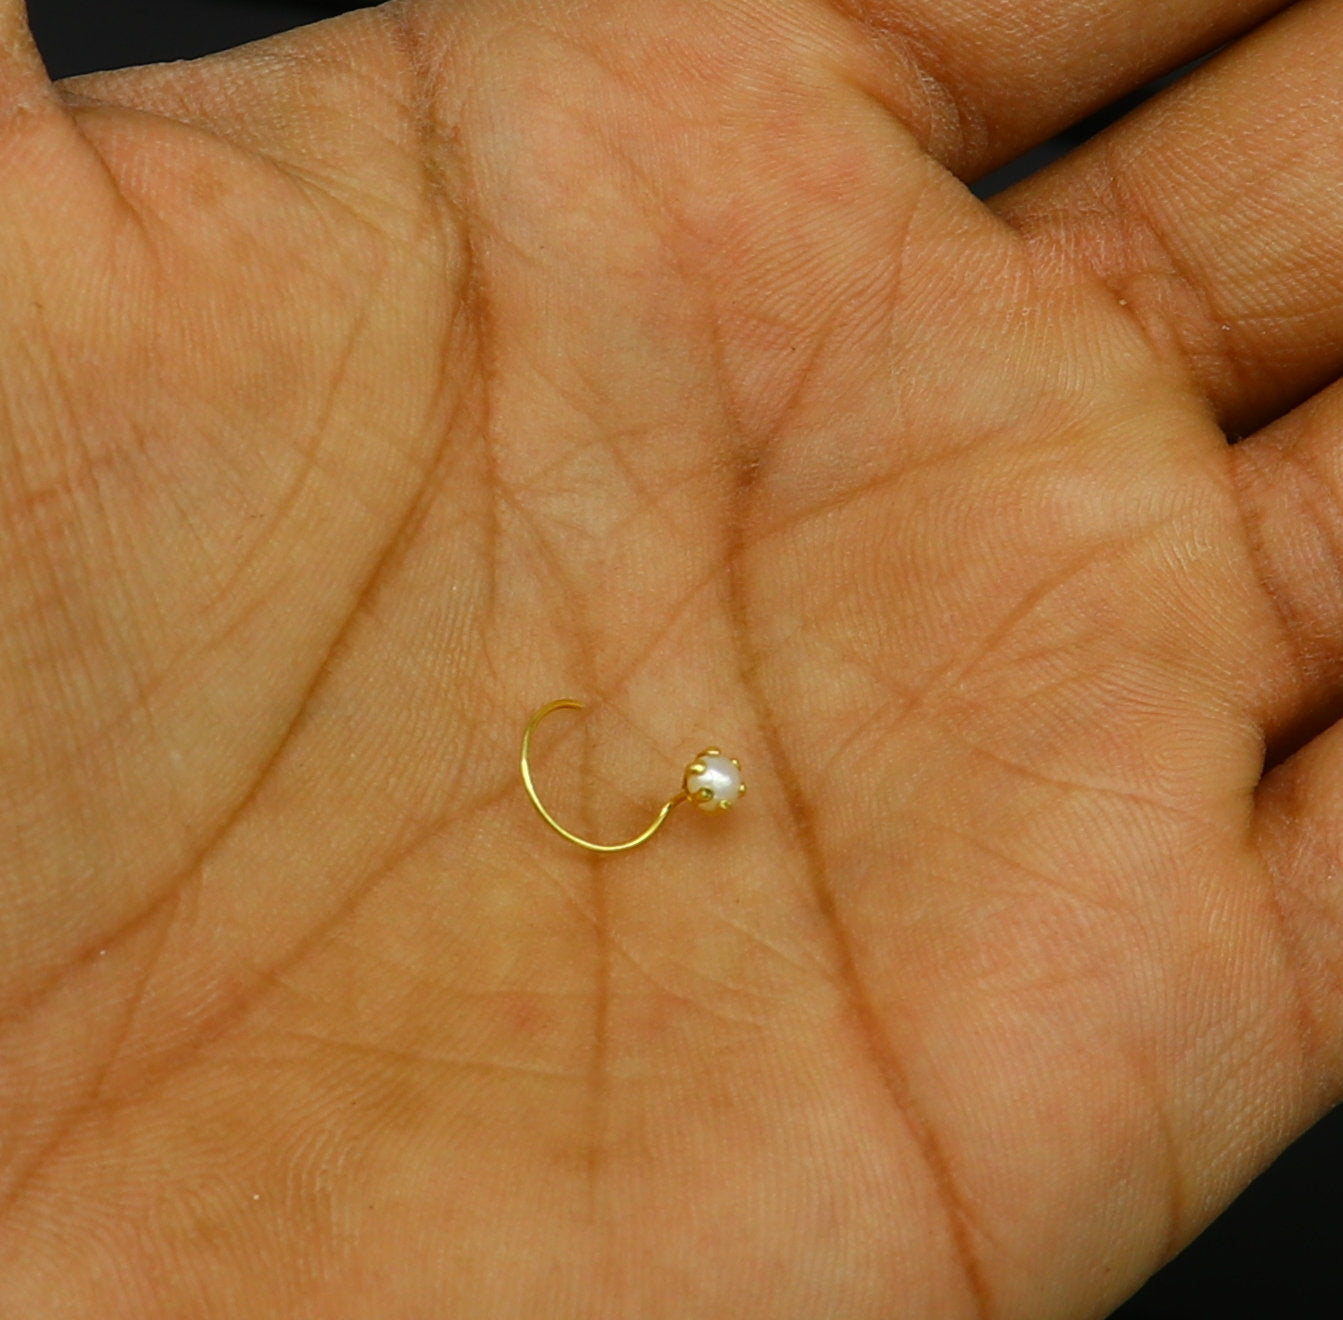 Buy Indian Nose Stud. 14k Gold Nose Ring. Nosestrill Screw. Gold Nose Stud. Gold  Nose Pin. Tribal Nose Ring. Gold Tragus. 14k Gold Body Jewelry Online in  India - Etsy